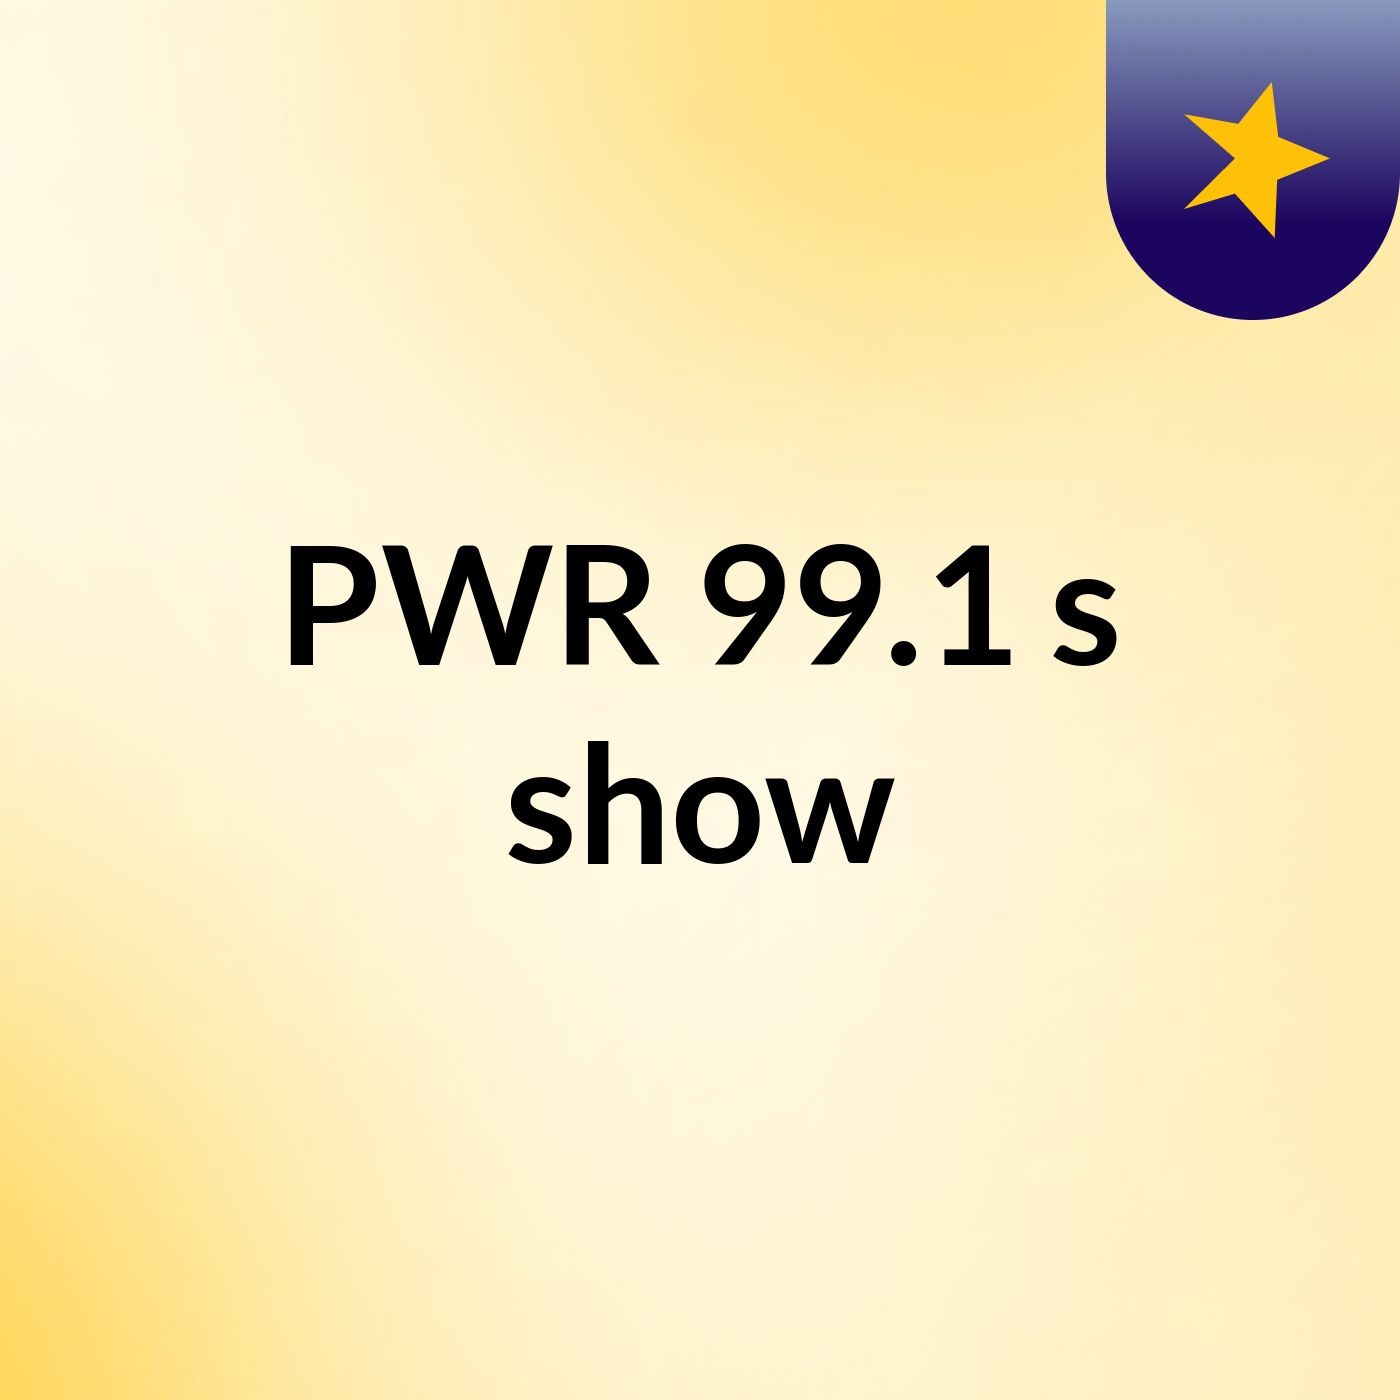 PWR 99.1's show